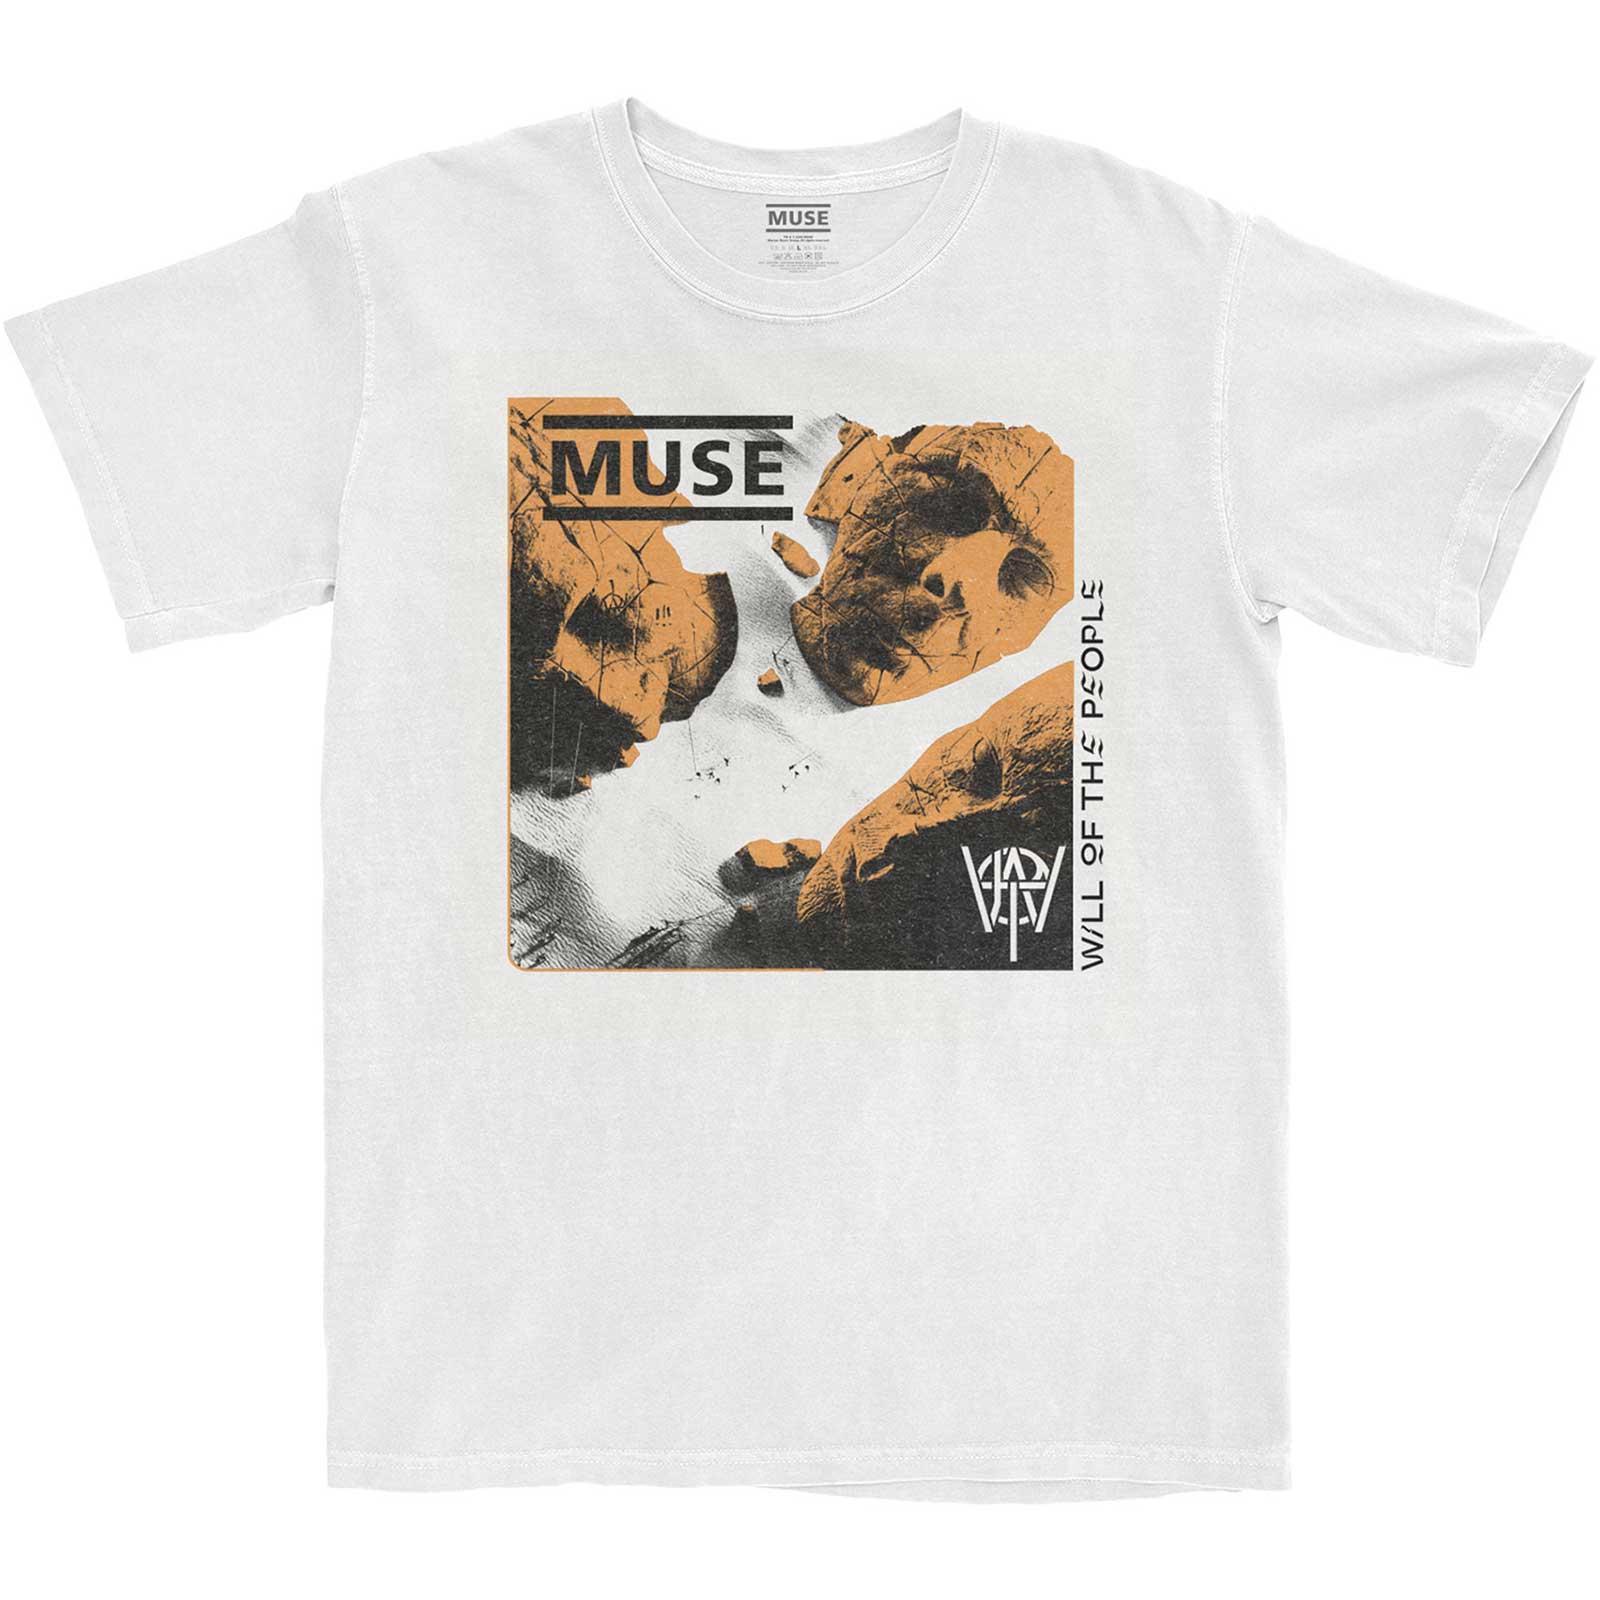 Muse Unisex Adult Will Of The People Cotton T-Shirt (White) (S)